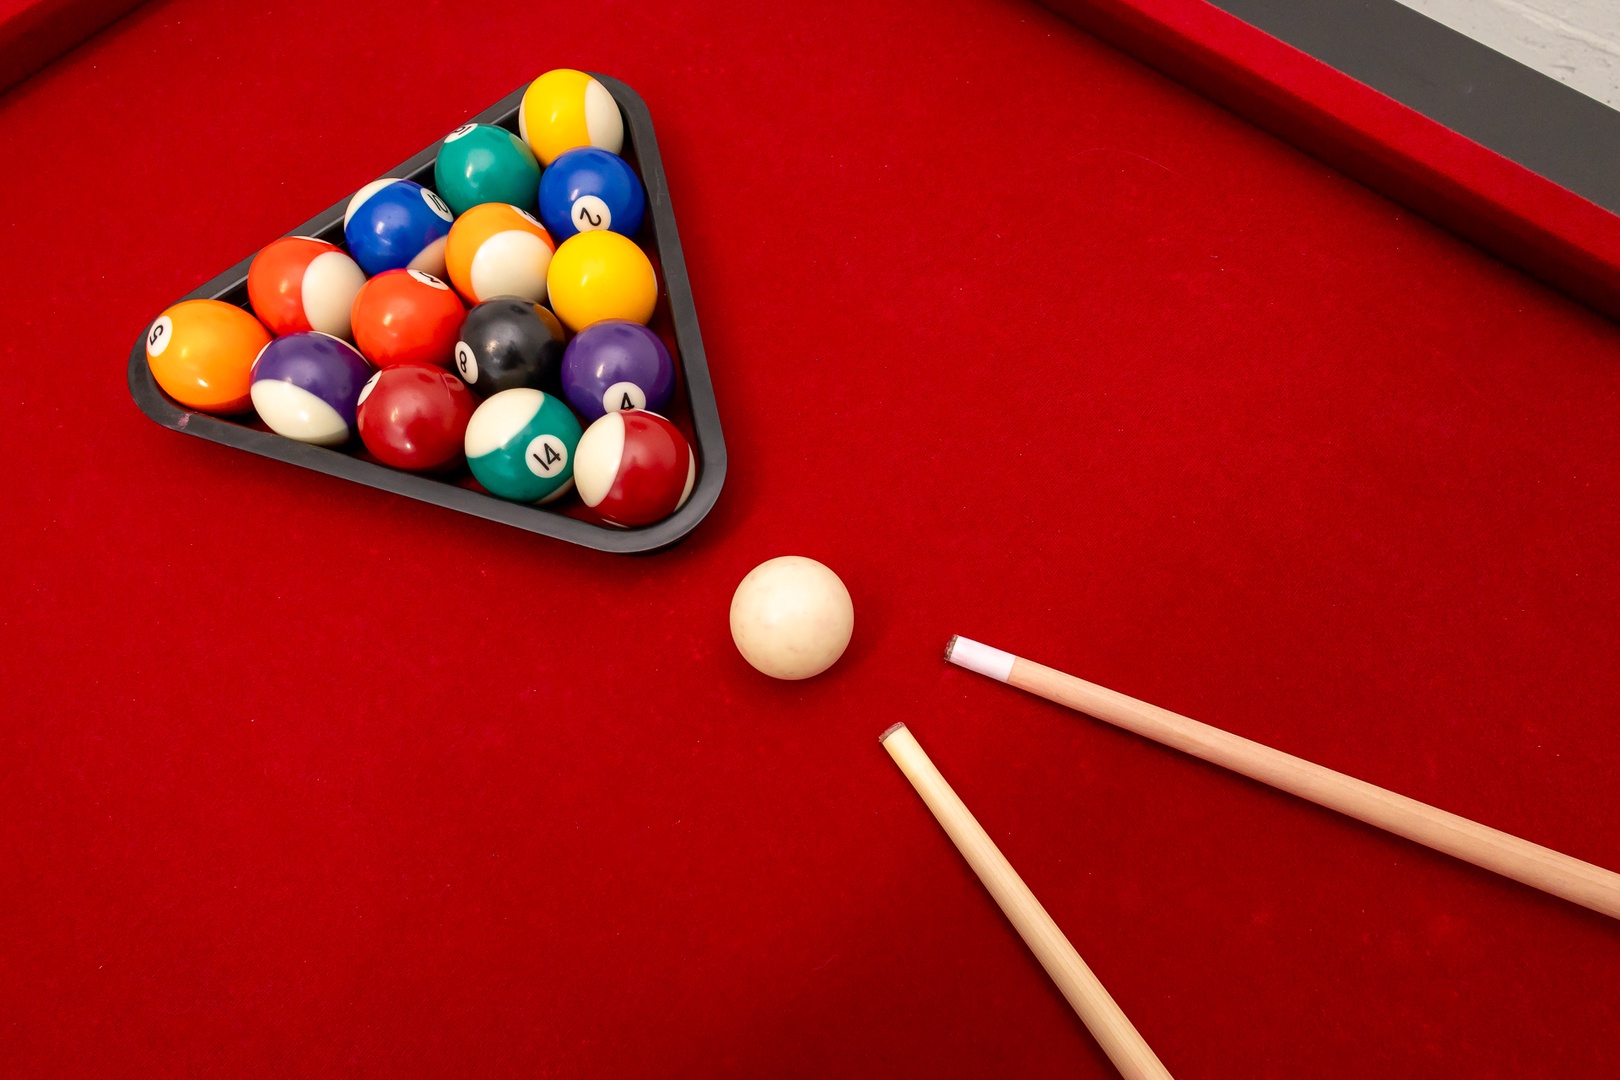 Game on! Dive into fun with pool, darts, and ping pong!